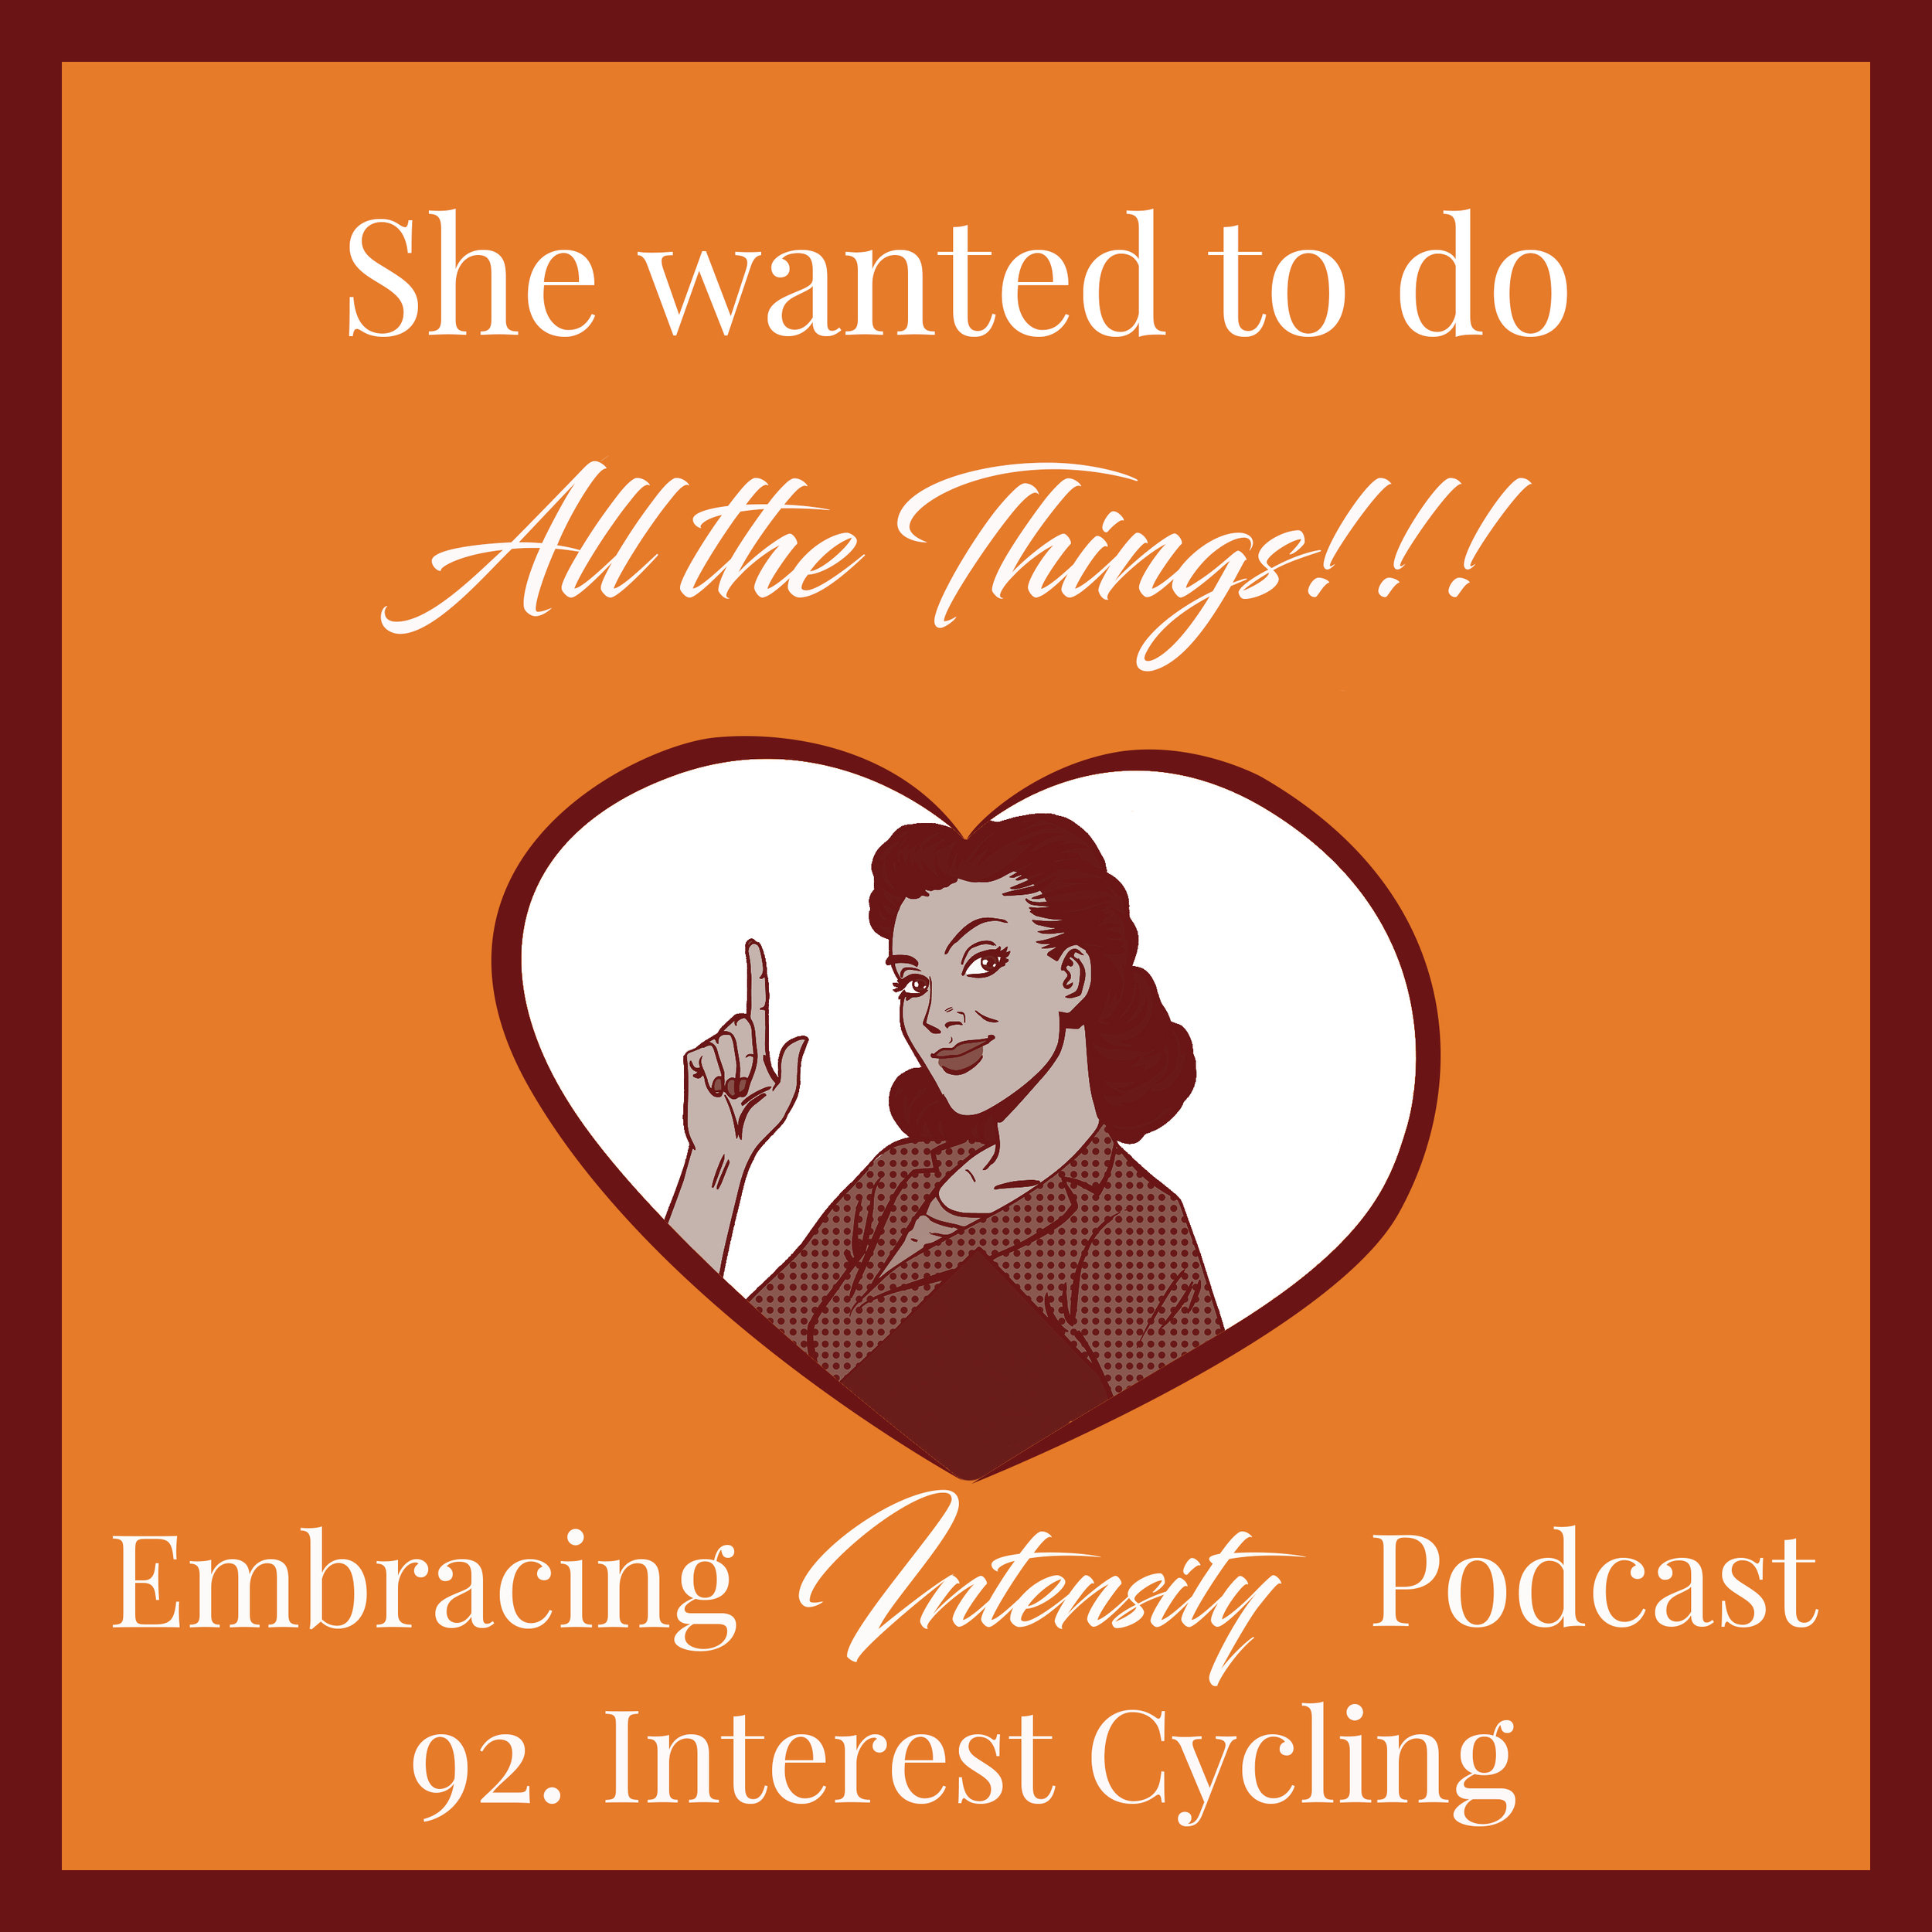 Interest Cycling - Embracing Intensity Podcast